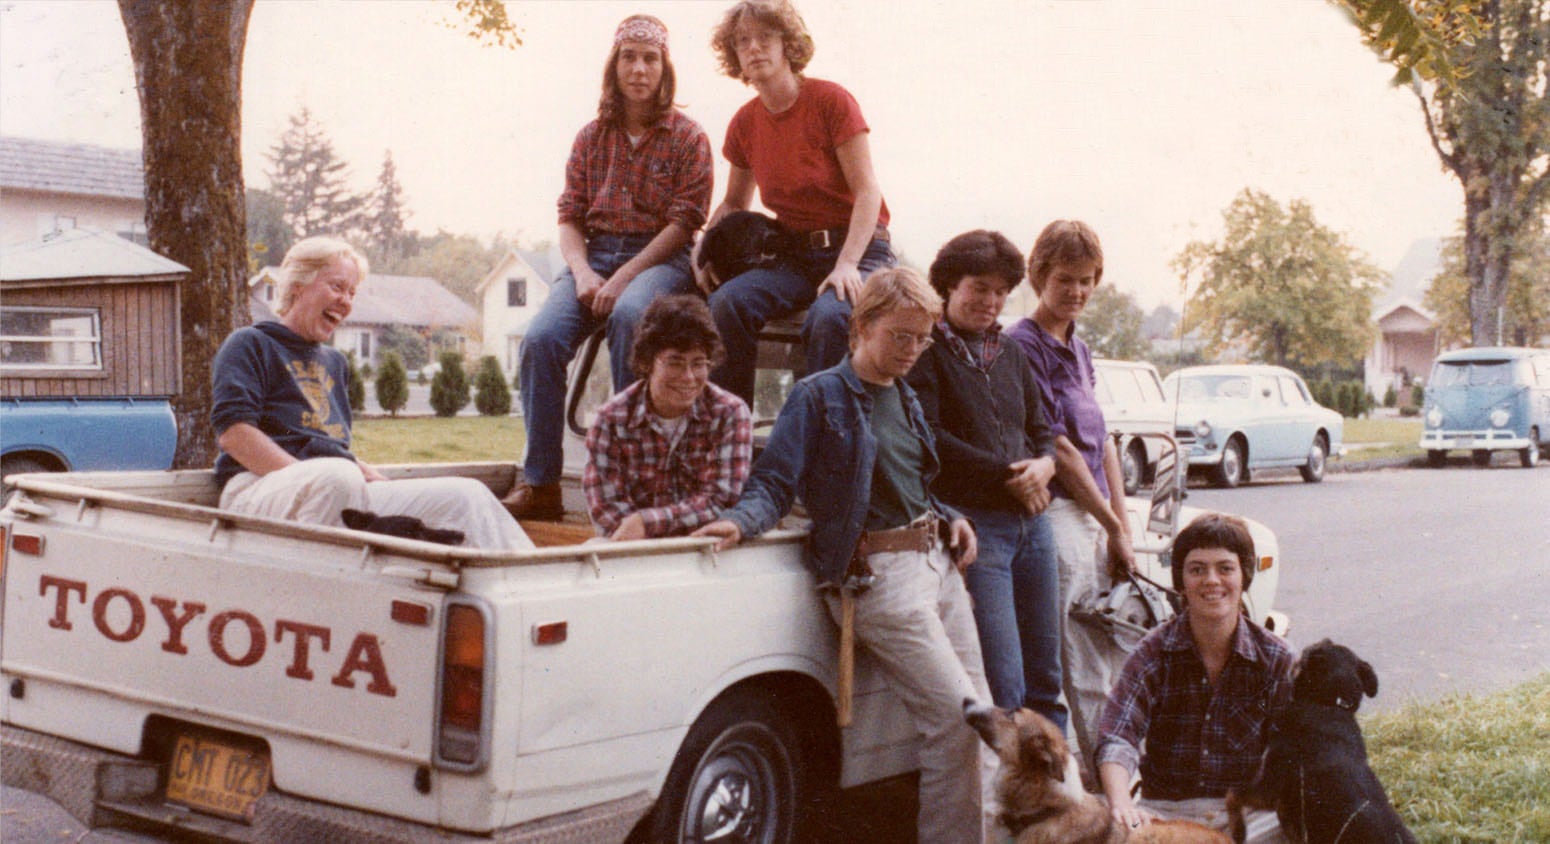 Several white women with short hair identifying as lesbians lean against a white Toyota pickup truck. There are four dogs in the image.